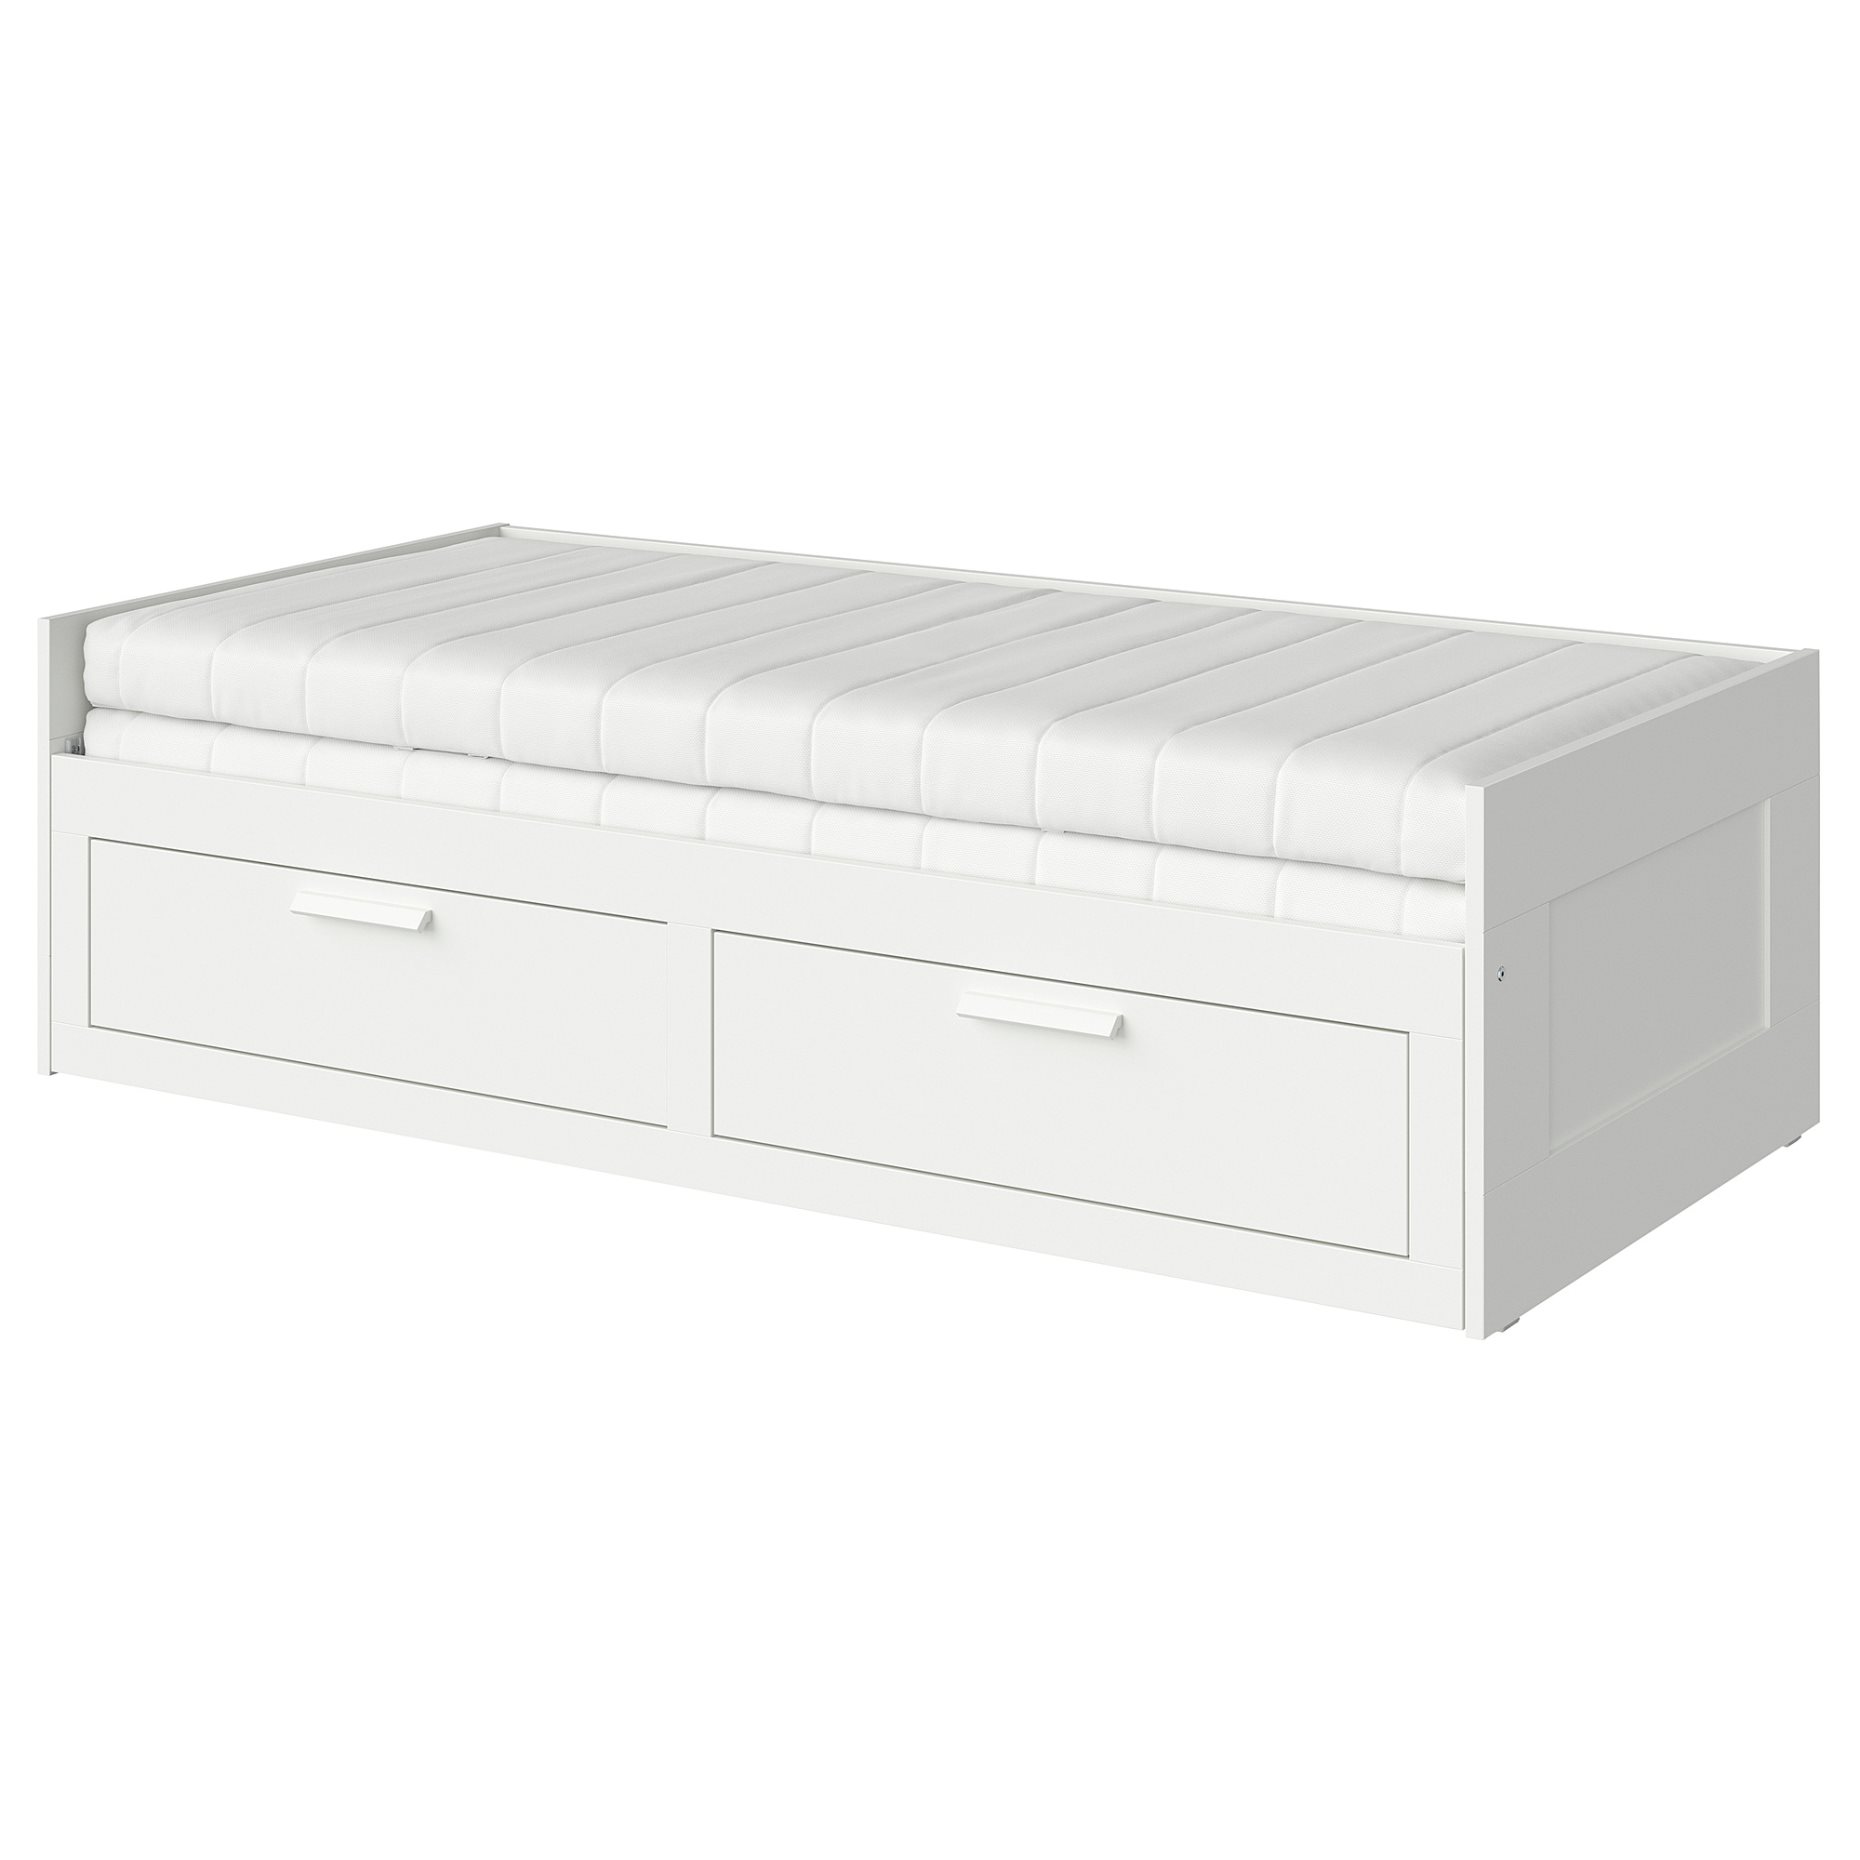 BRIMNES, day-bed with 2 drawers/2 mattresses, 80x200 cm, 894.944.99